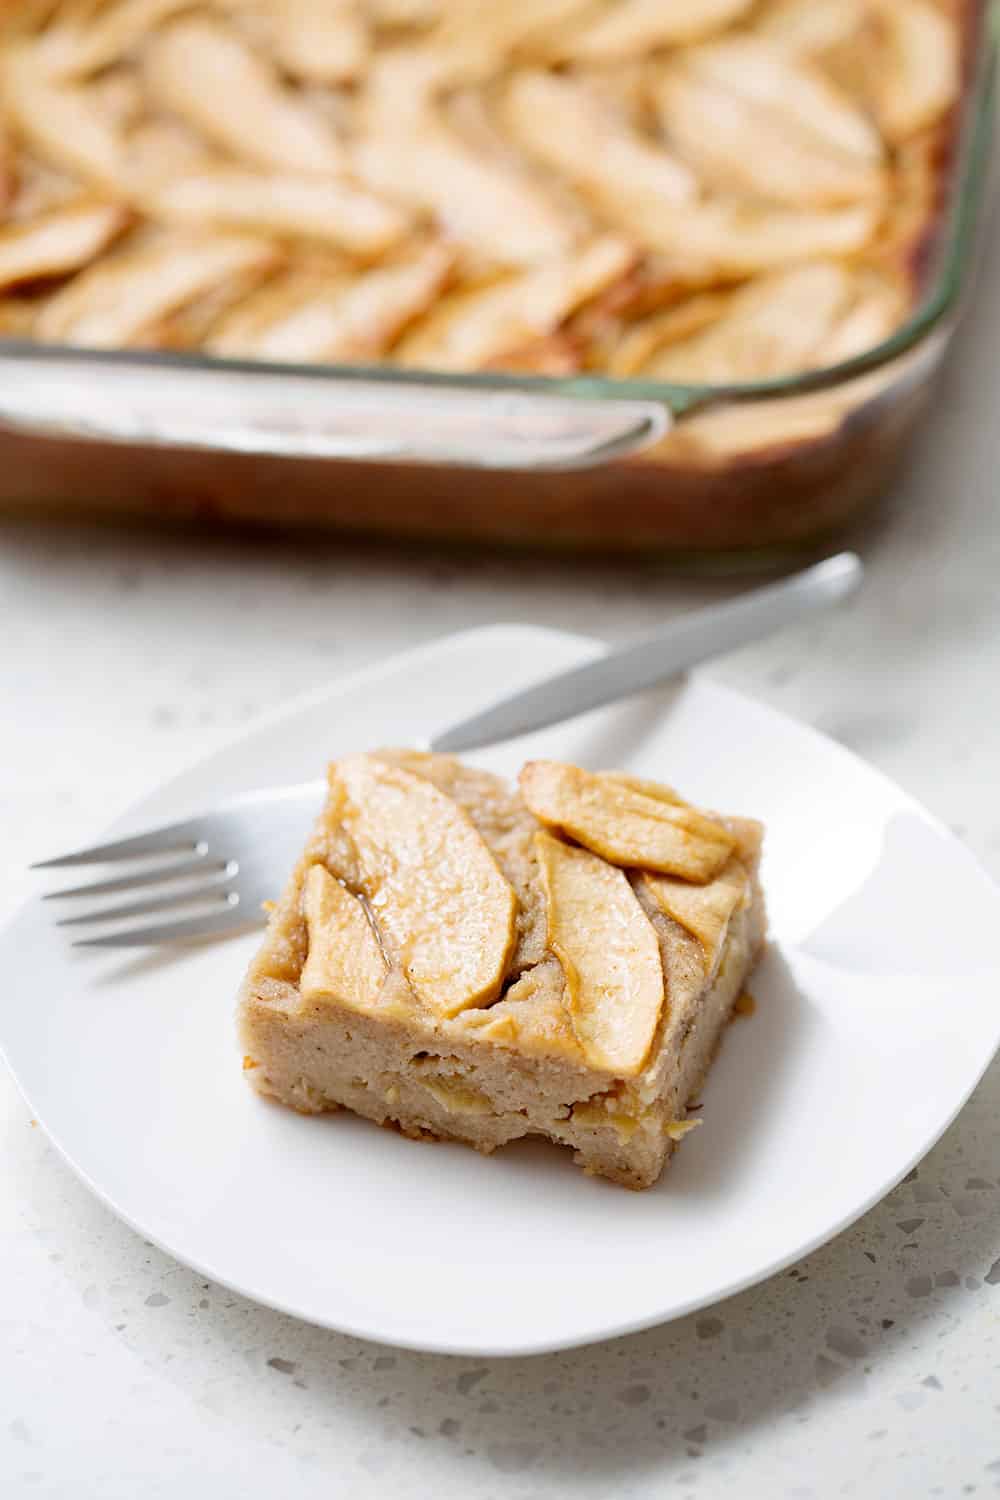 Piece of AIP Gooey Apple Sheet Cake on plate with fork